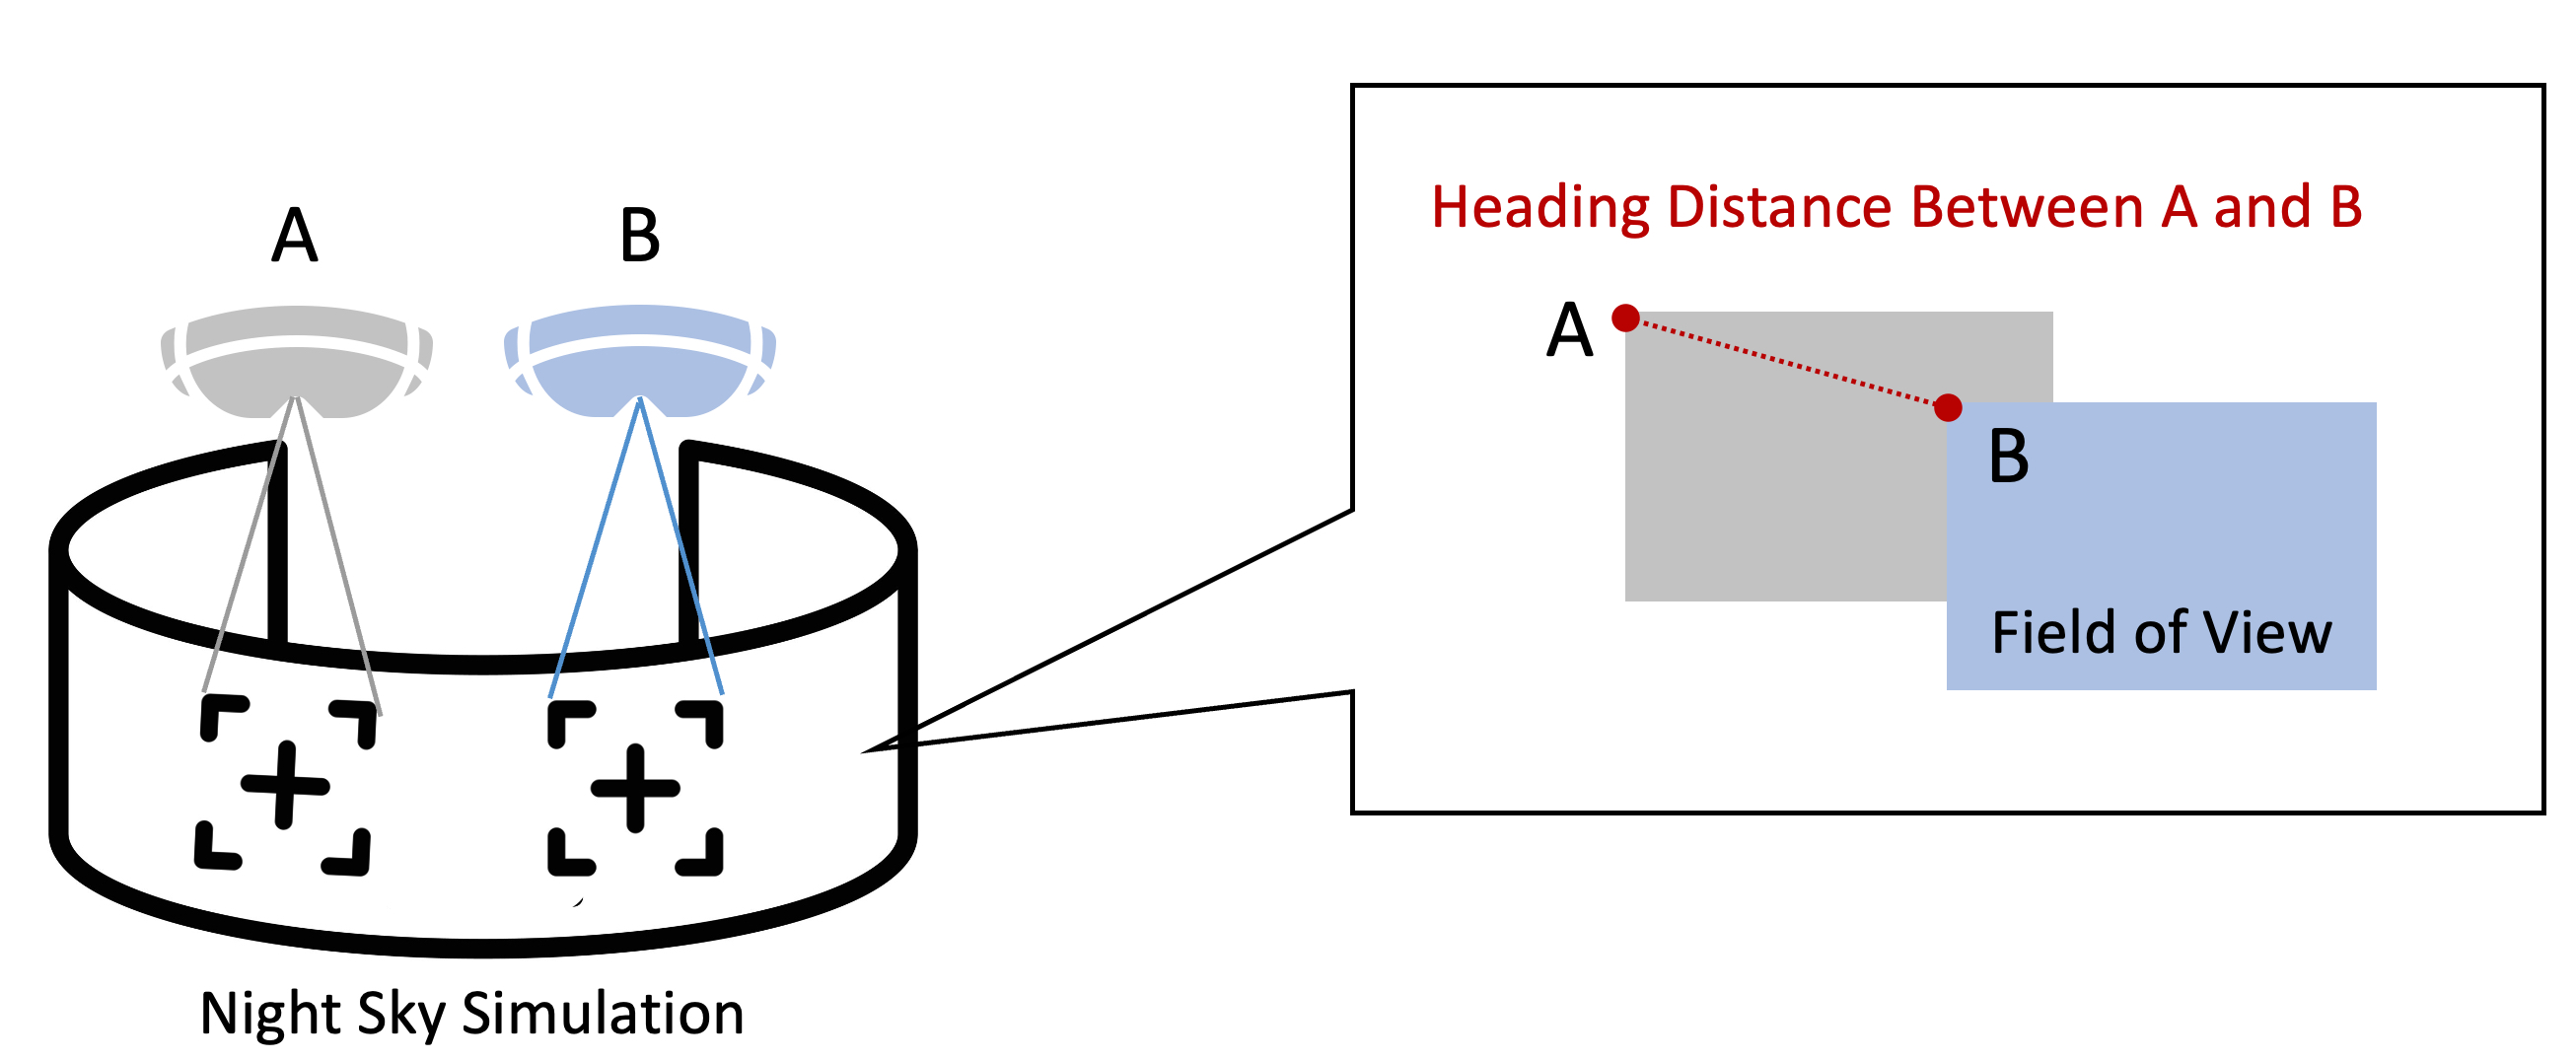 This figure displays the calculation of heading distance